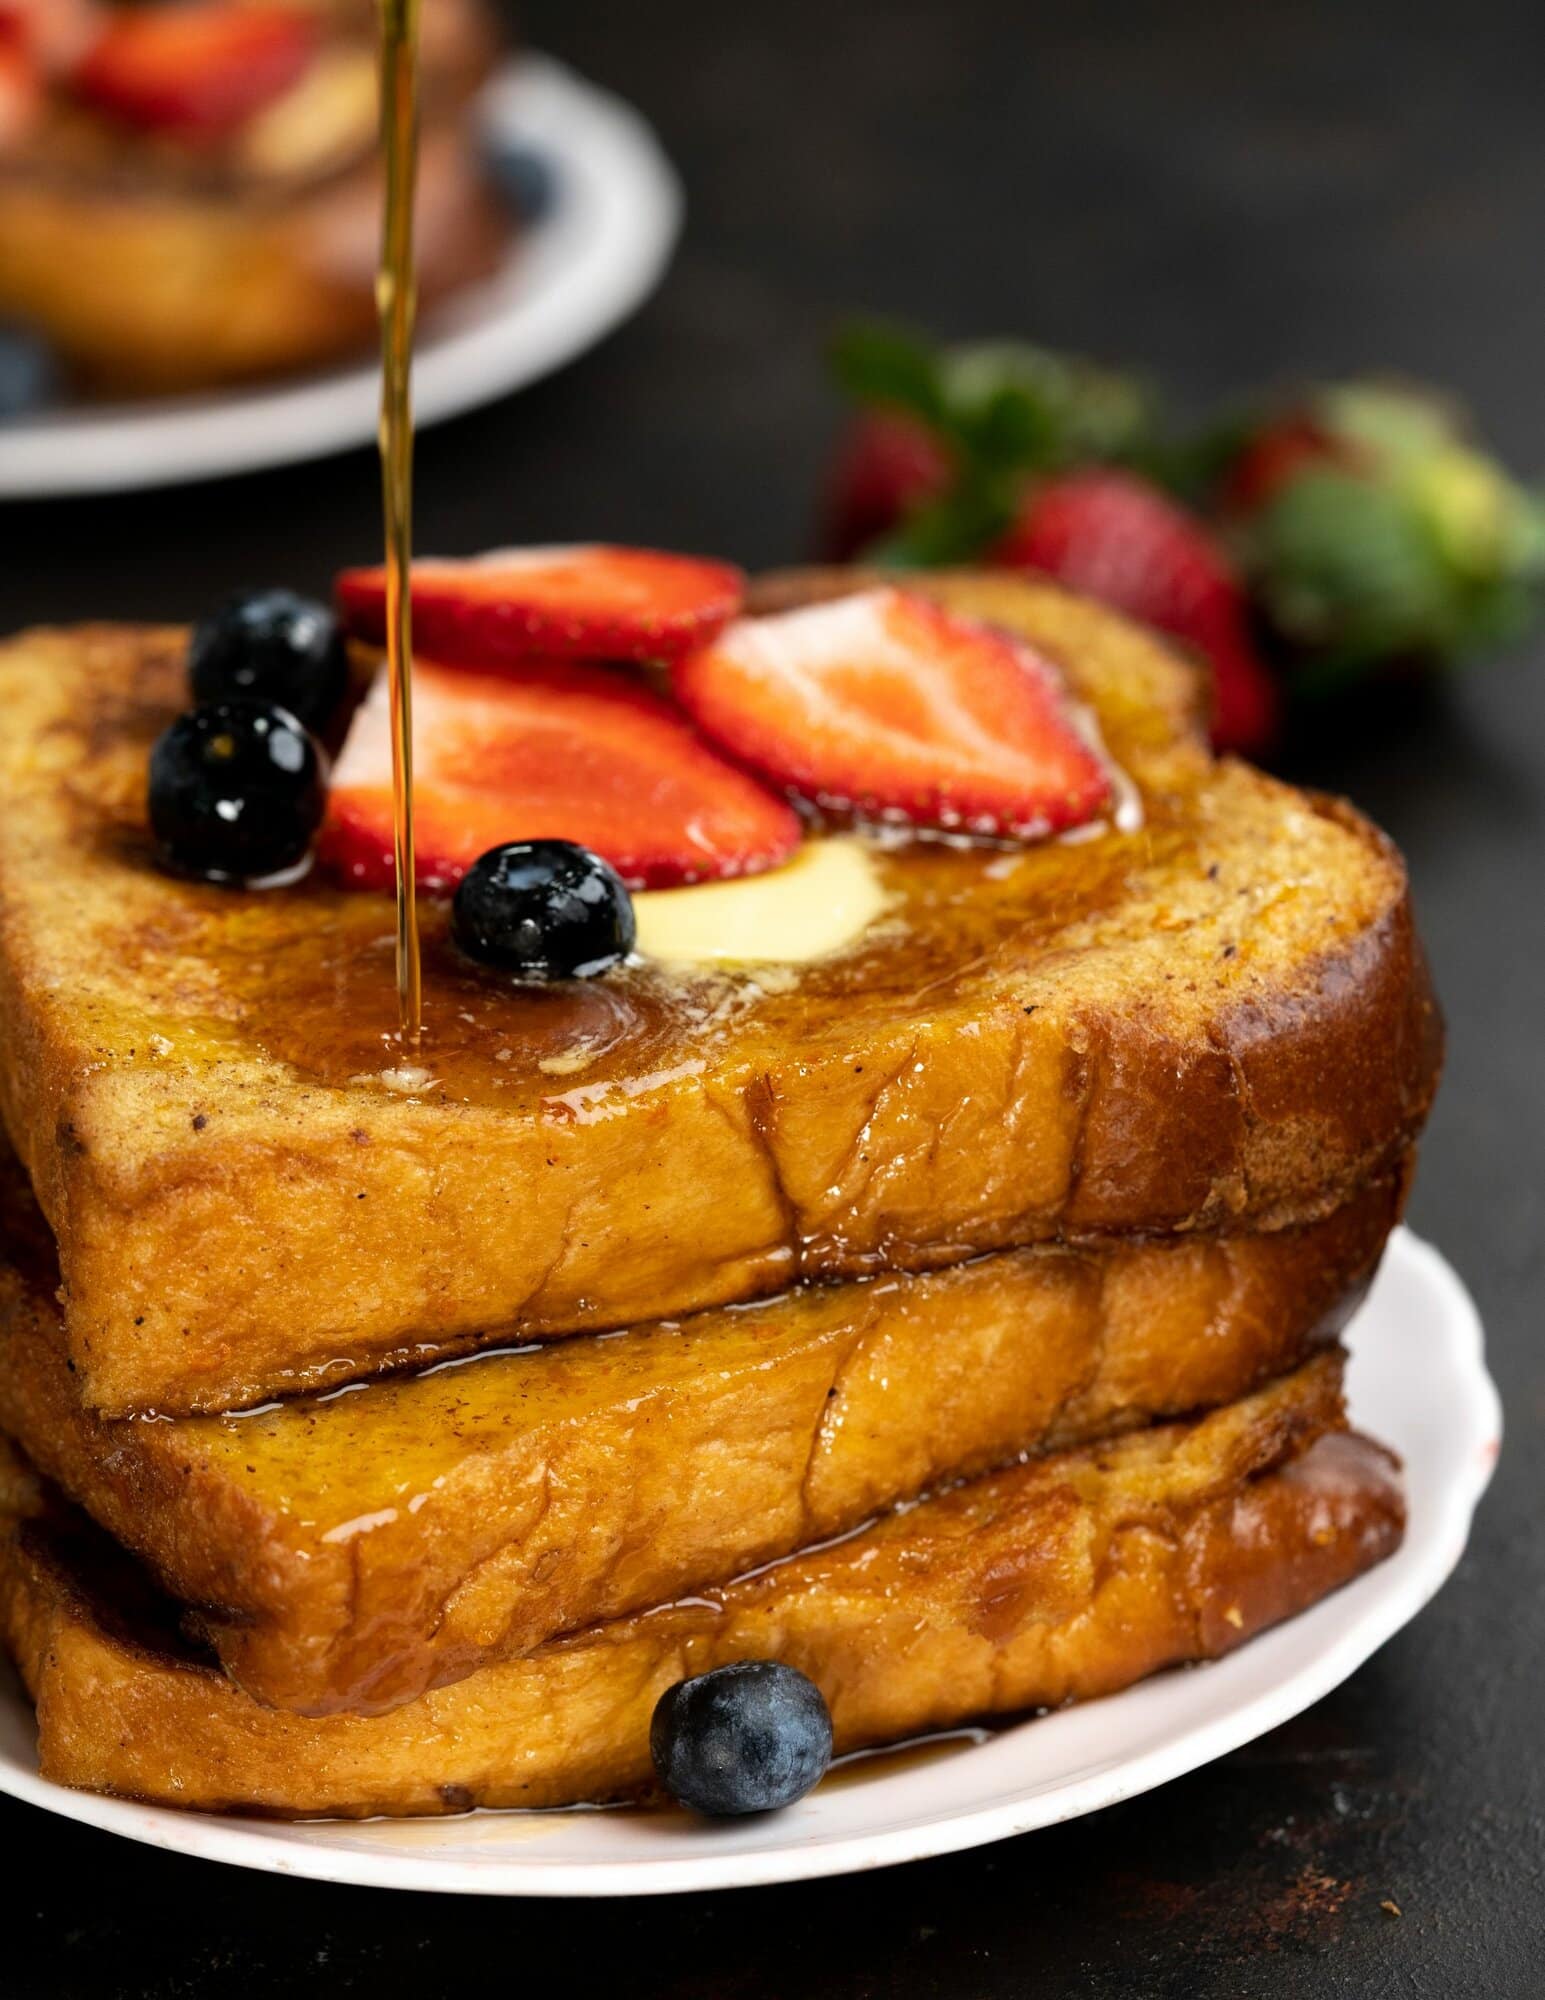 Maple syrup drizzled on a stack of brioche bread toasts, also topped with a dollop of butter and berries.